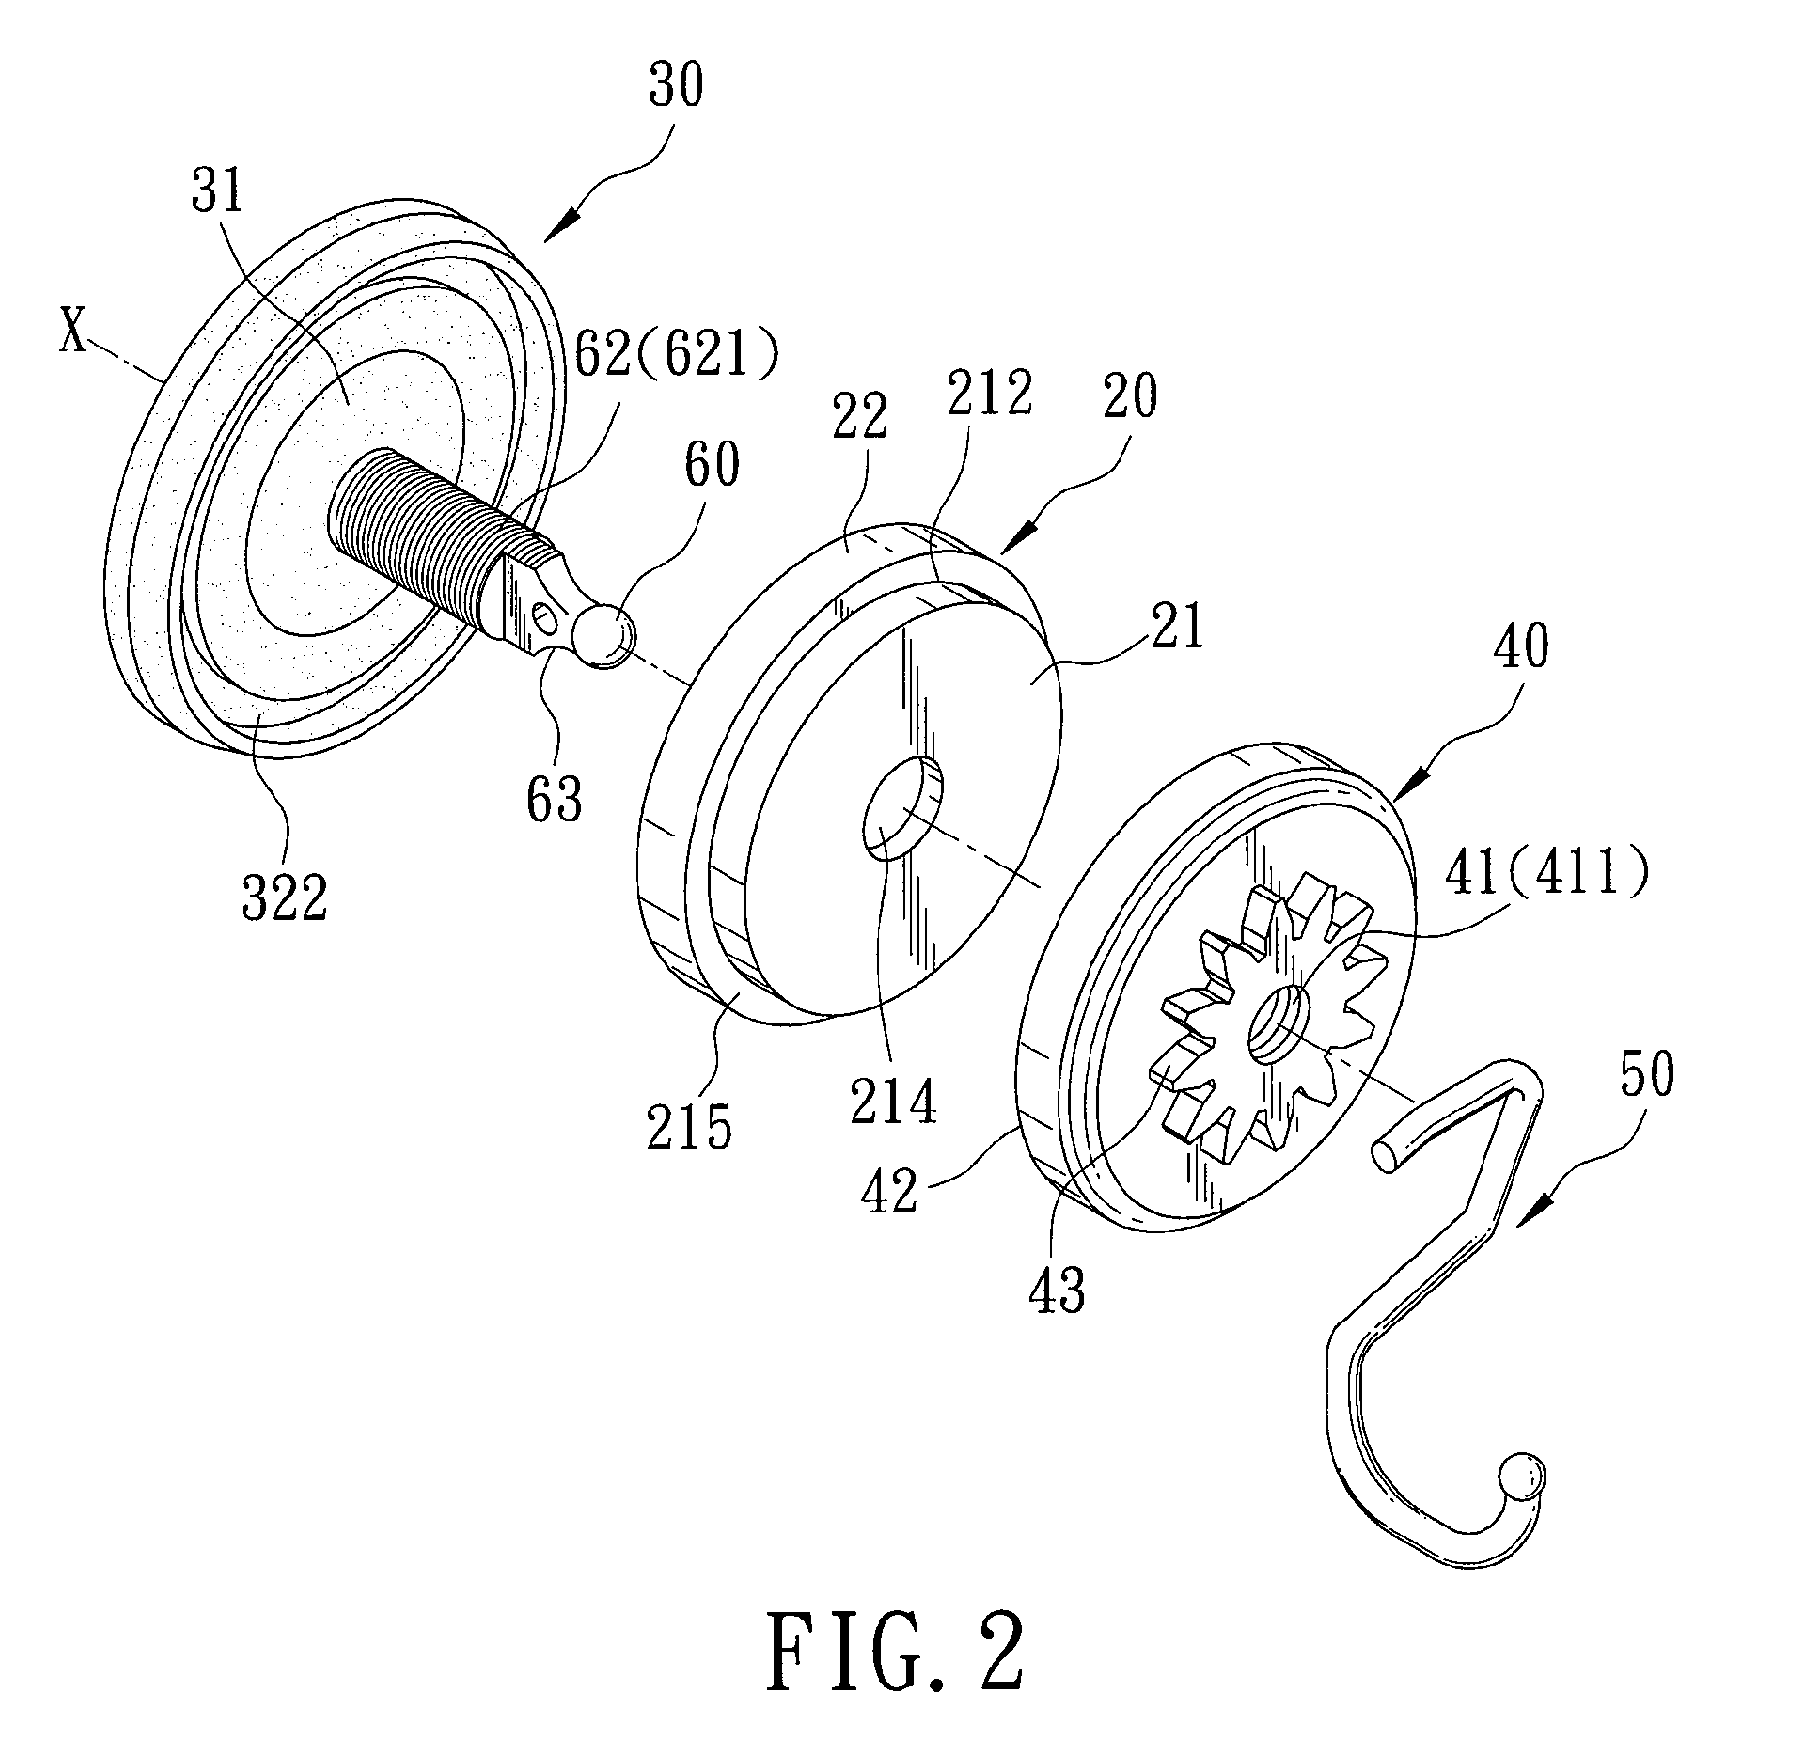 Suction cup device